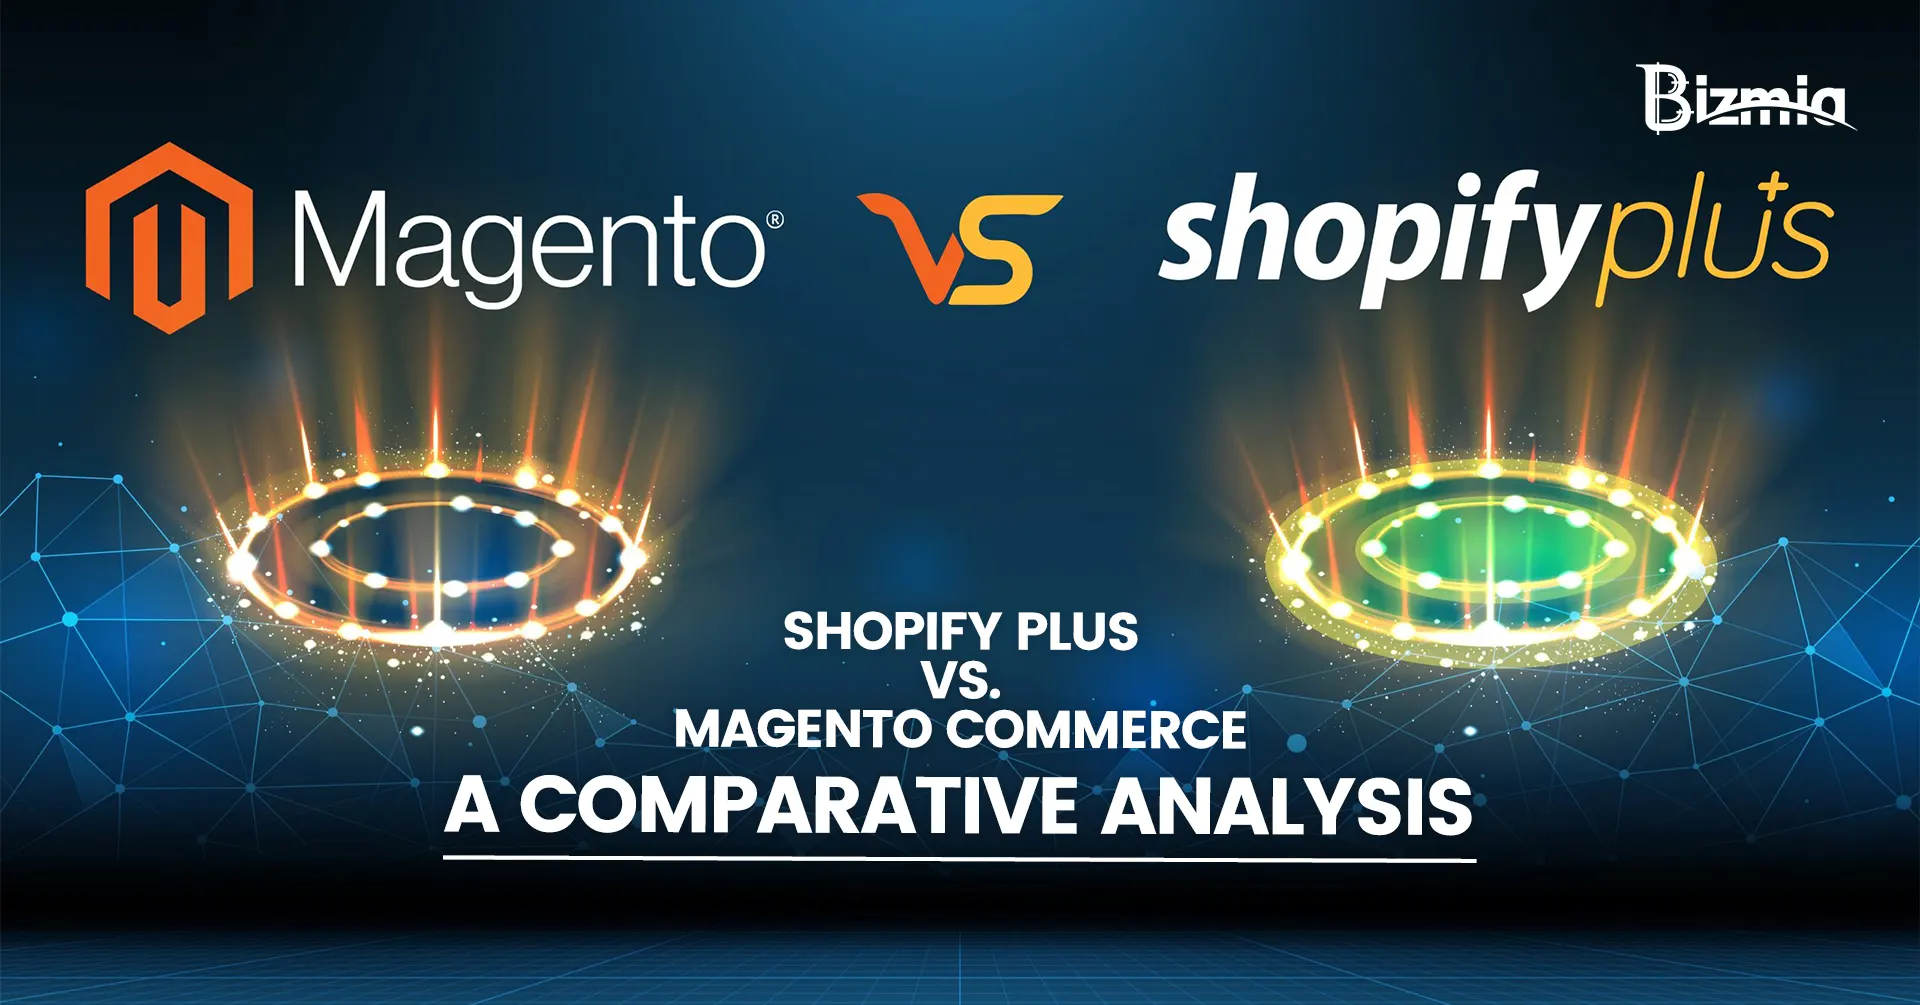 Shopify Plus and Magento Commerce